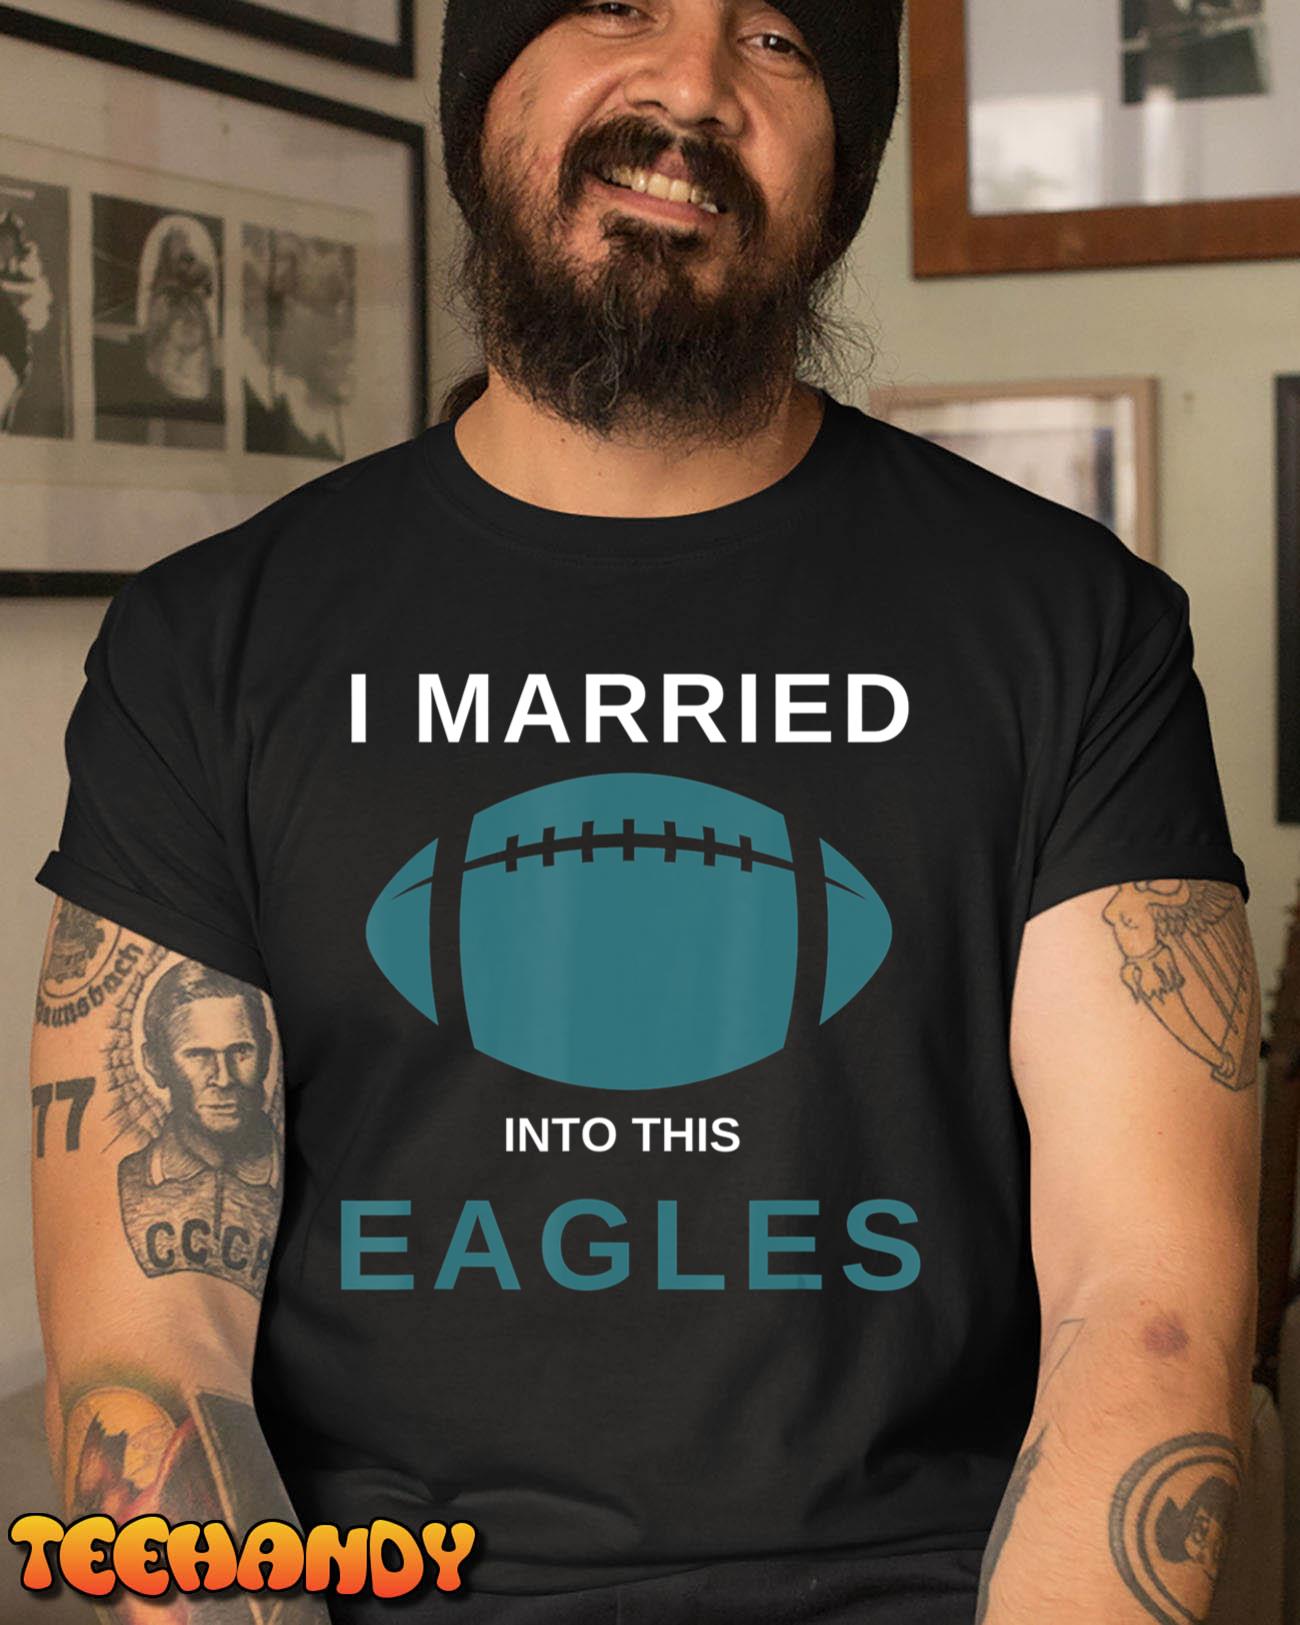 I Married Into This Eagles Funny design Quote Apparel T-Shirt